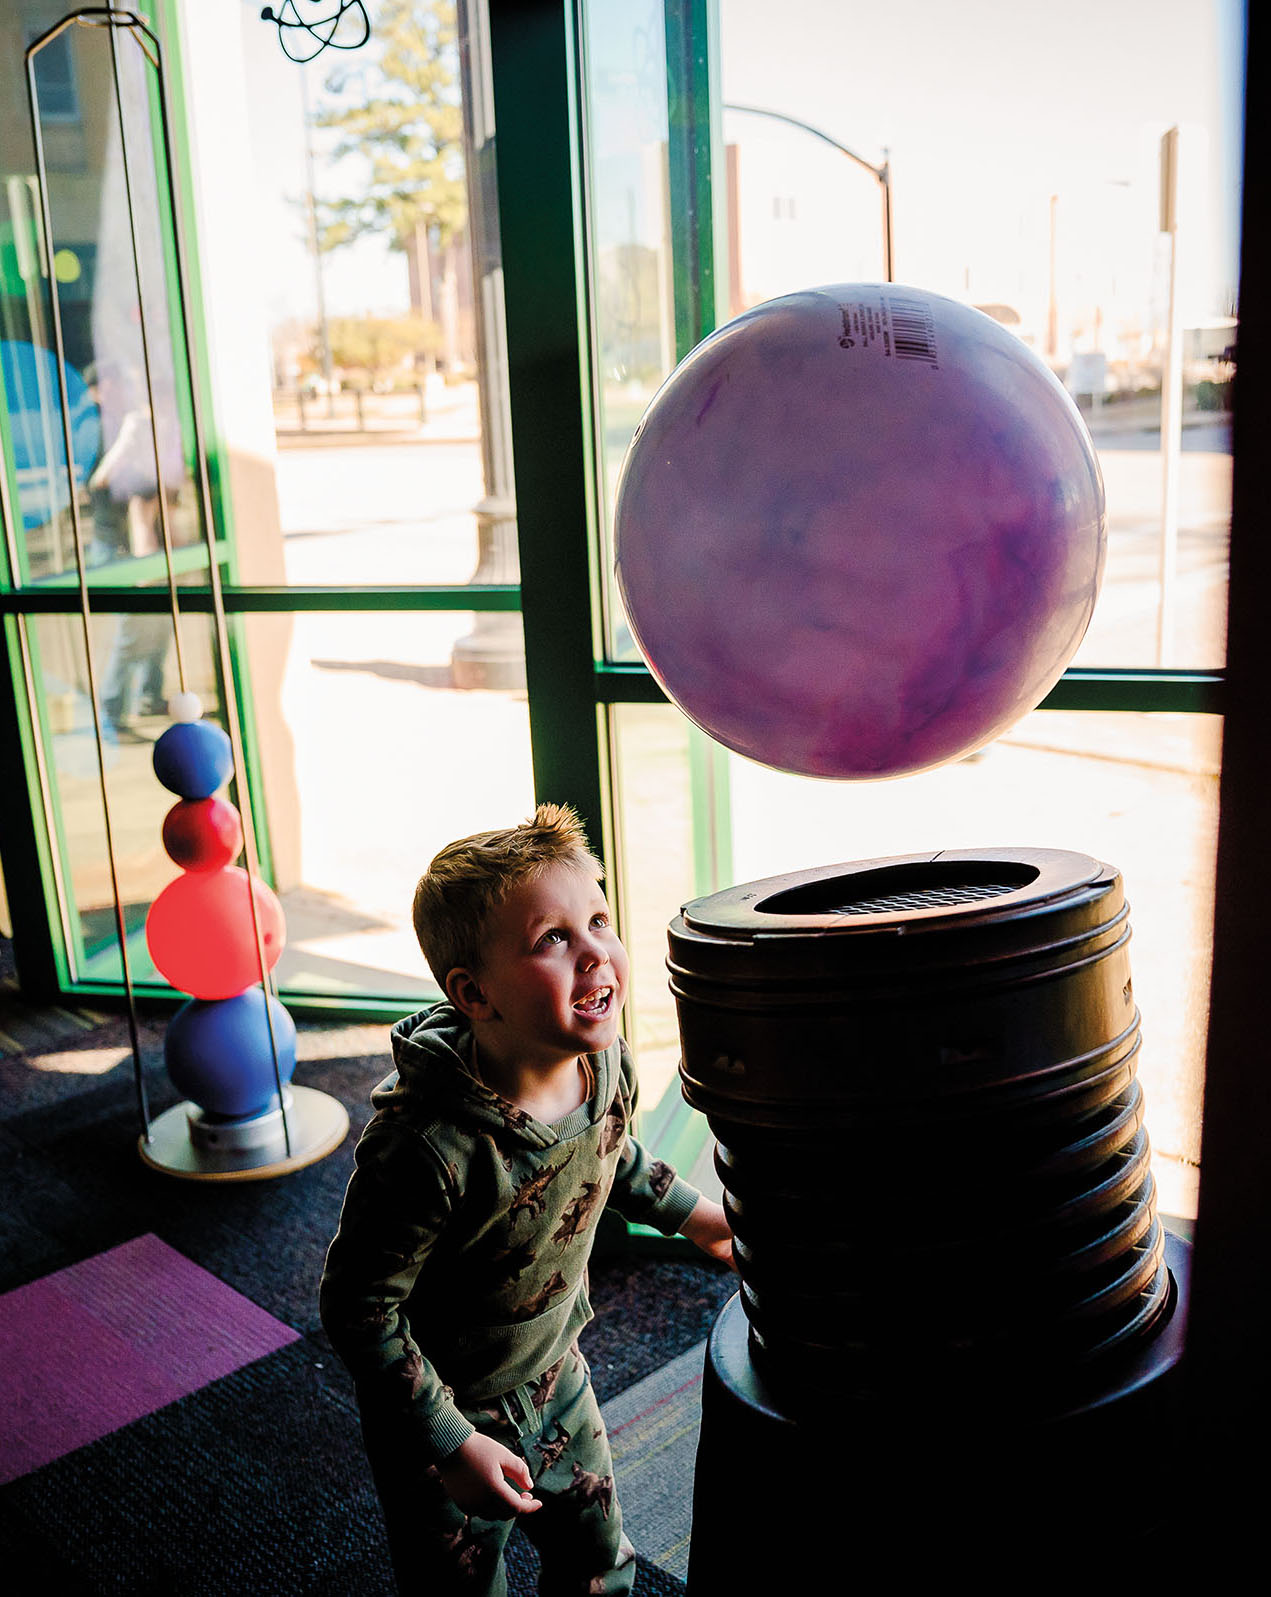 A young person watches as a large purple ball is held up by air above a large tube